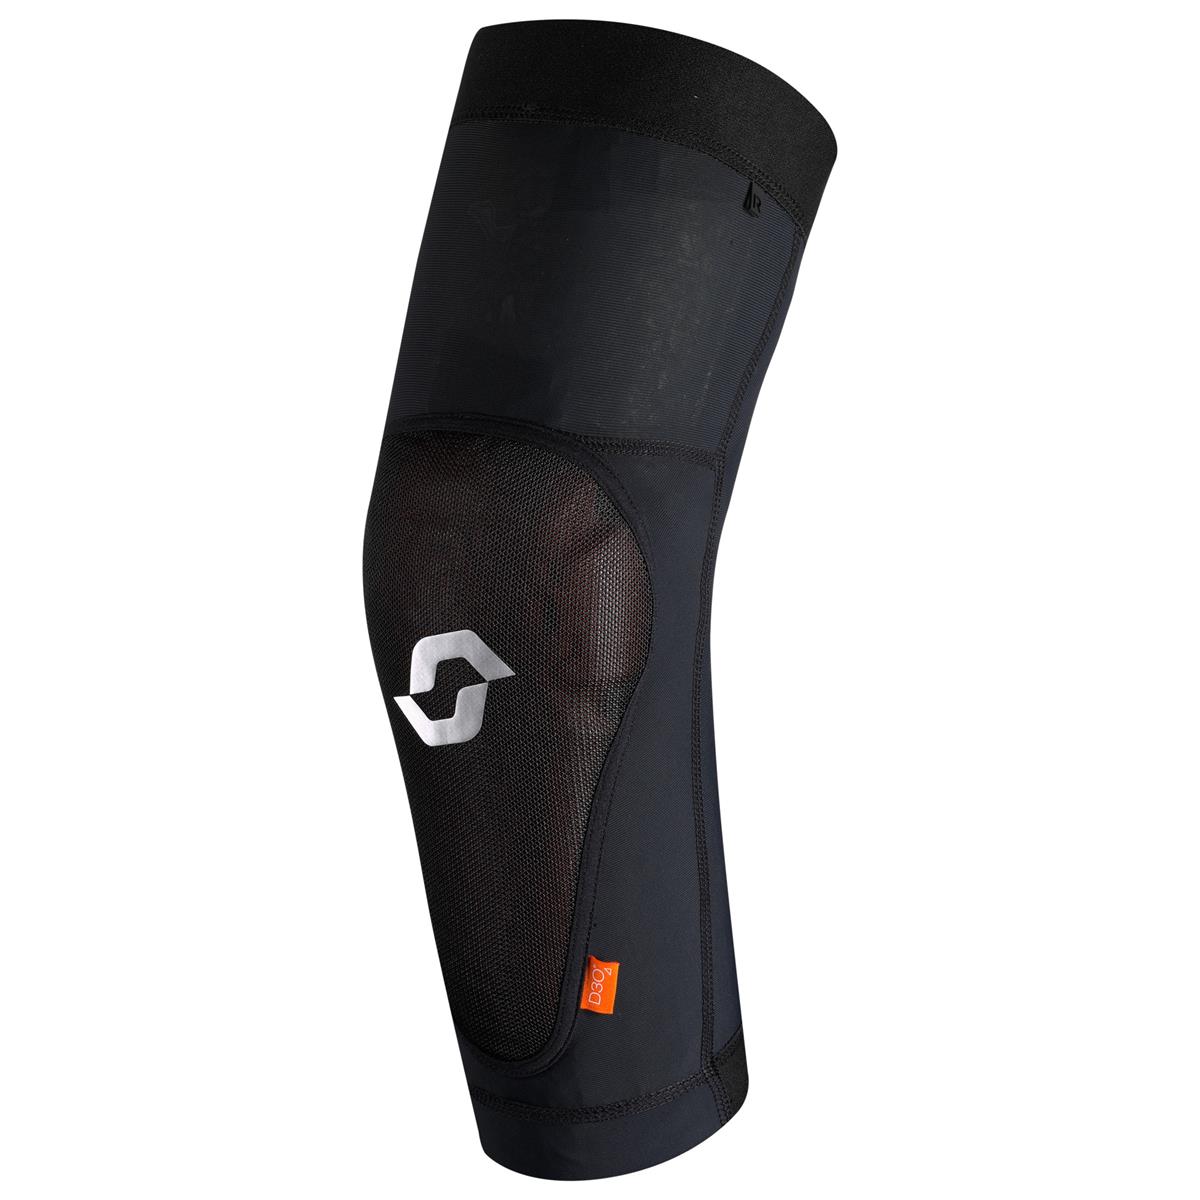 Elbow guards Softcon 2 Black/Grey - Size M